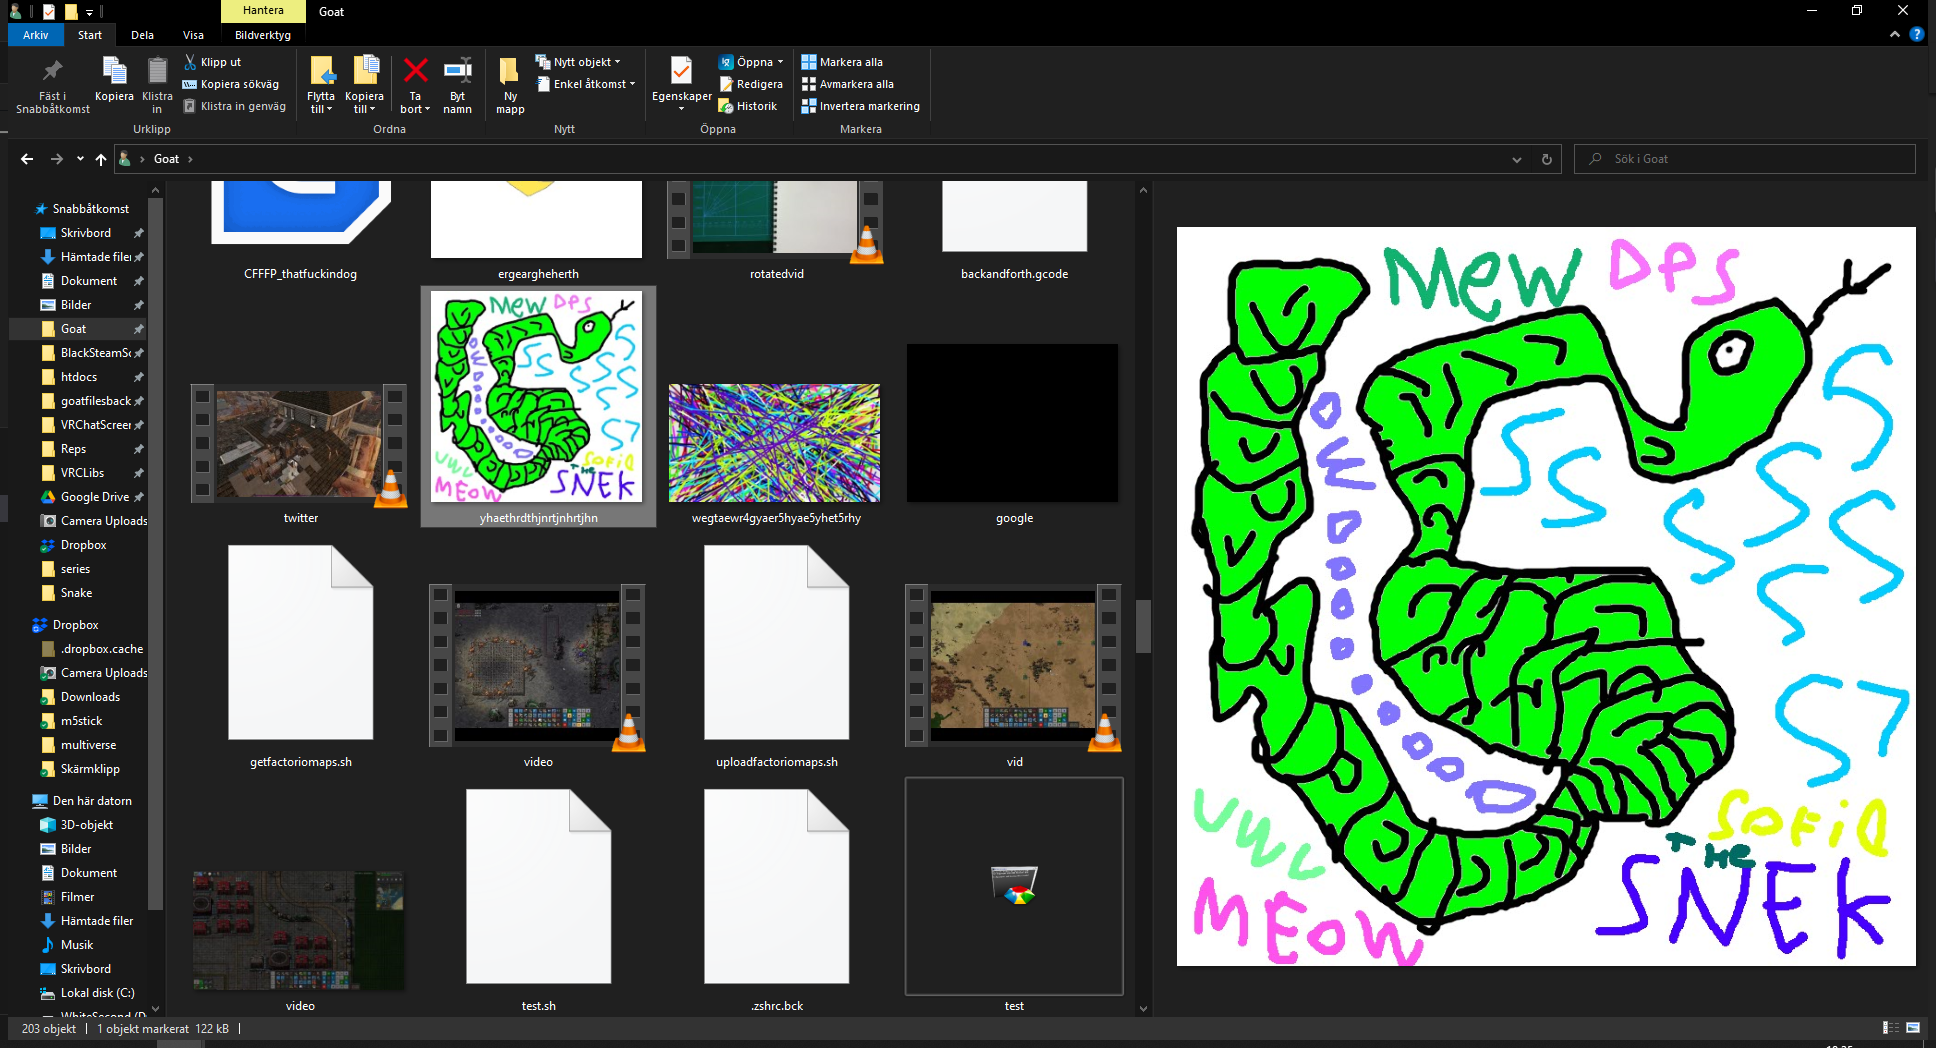 
Windows Explorer in dark mode showing a folder with many files and there is a bar to the left that shows various folders through quick access and dropbox and a computer icon each with many folders in them. The main window shows around 16 files with big icons with preview for the images. To the right is a preview of a poorly drawn snake that says mew among other things. There is a top bar too that lets you copy stuff and create folders and such.
